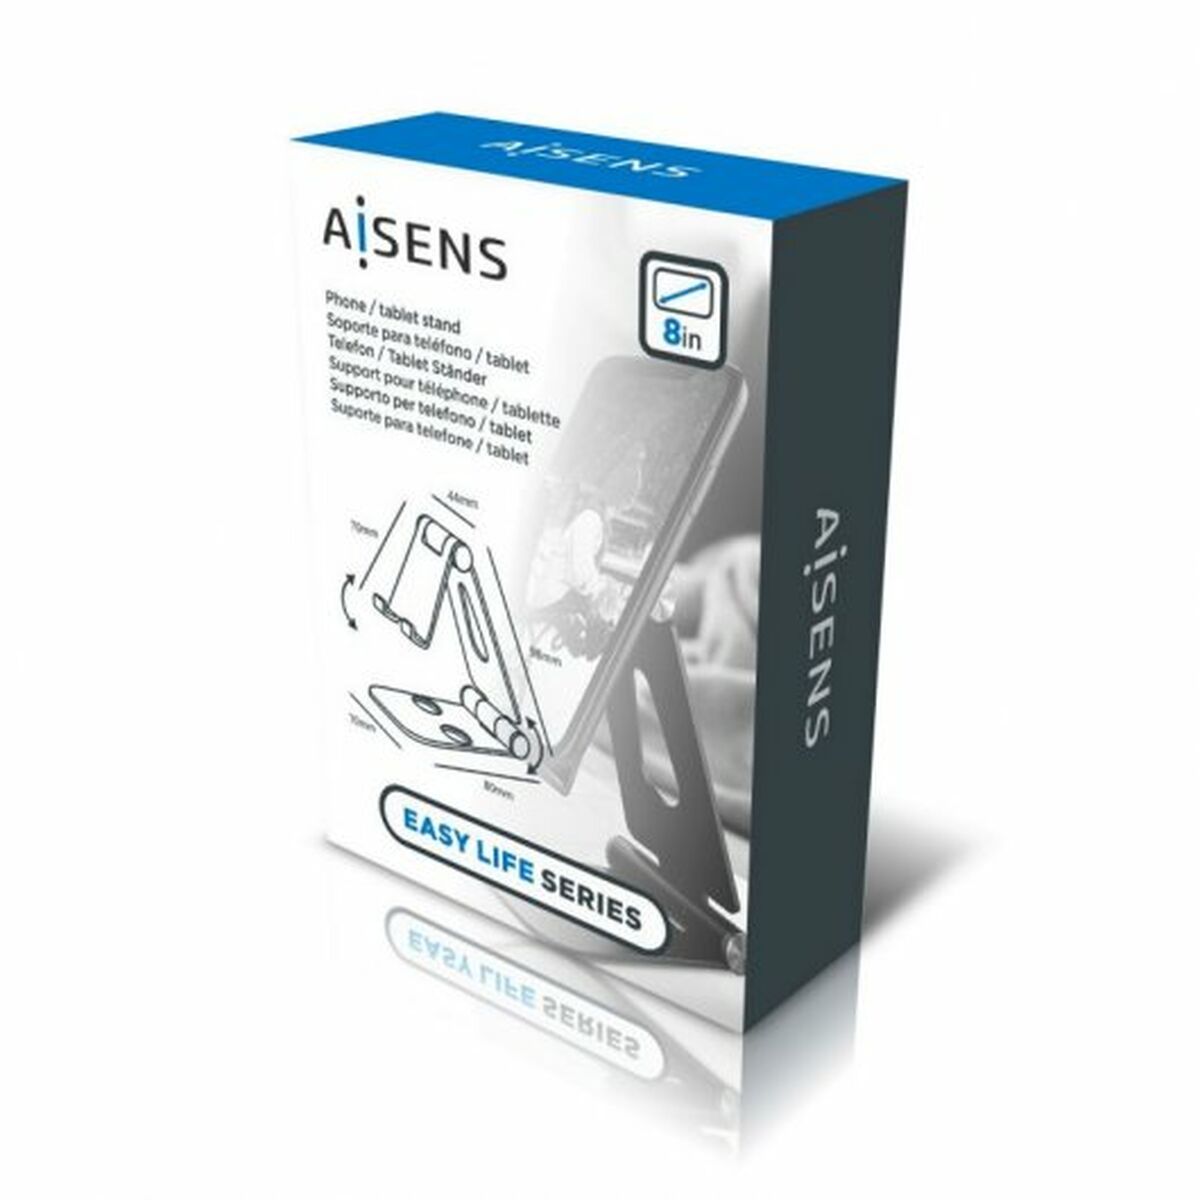 Mobile or tablet support Aisens MS2PM-086 Steel 8" (1 Unit)